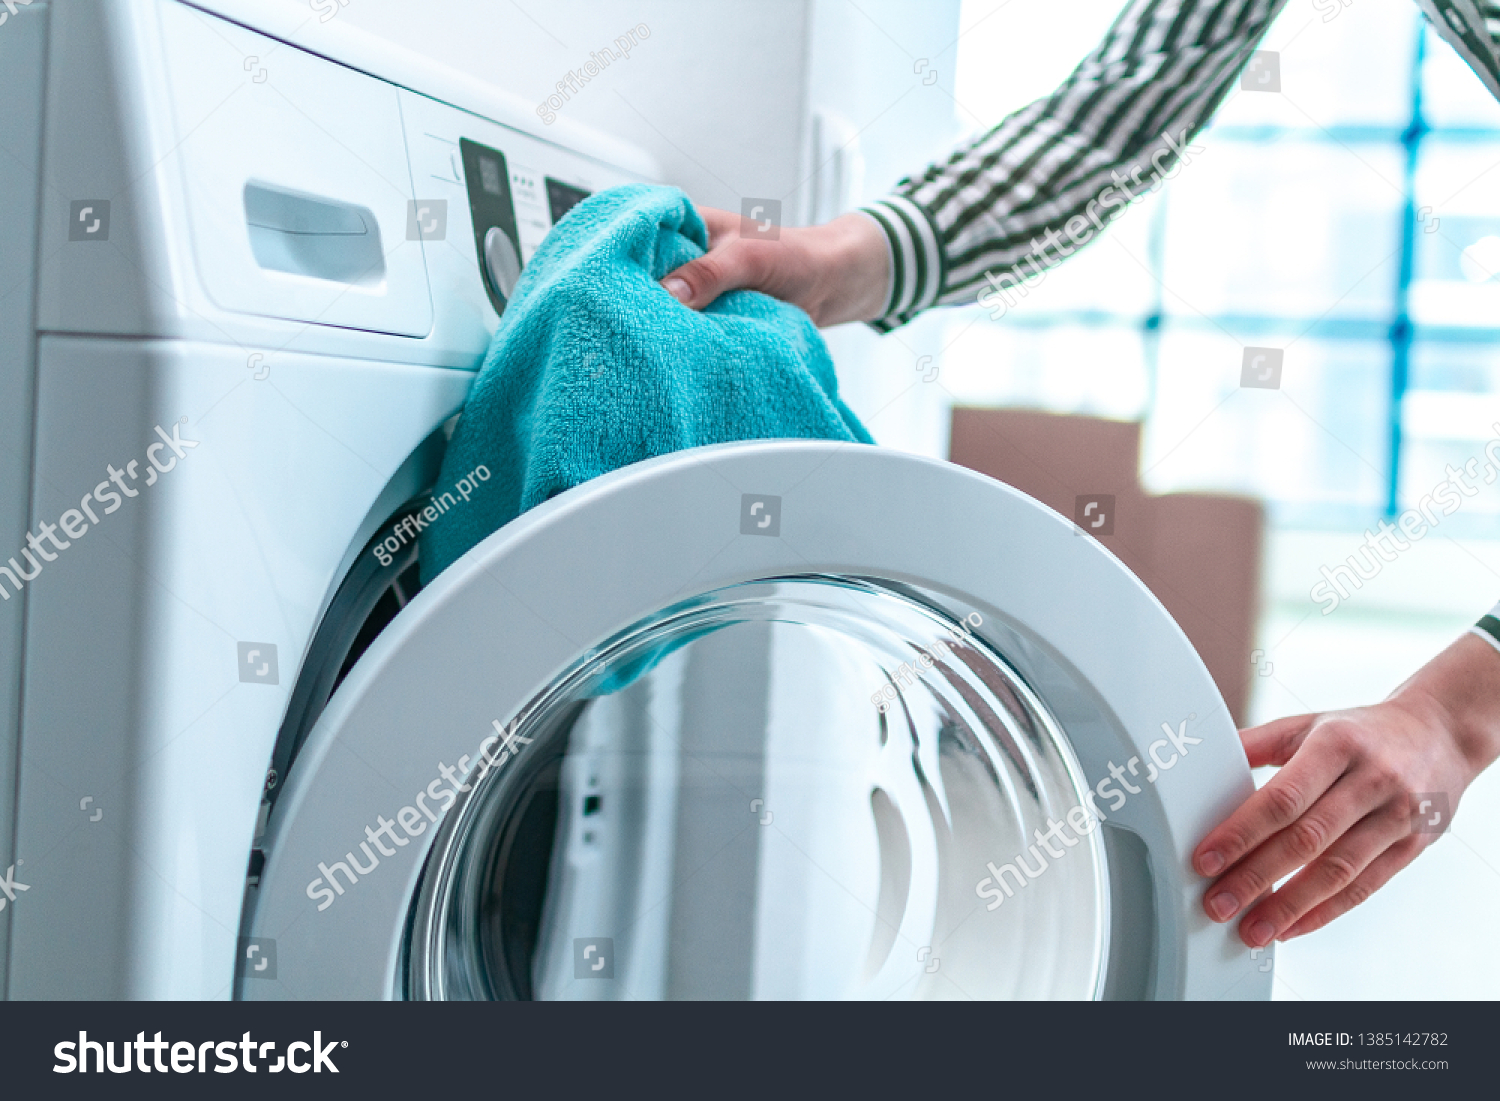 Loading towel, clothes and linen in washing machine. Doing laundry at home. Household chores and housekeeping #1385142782